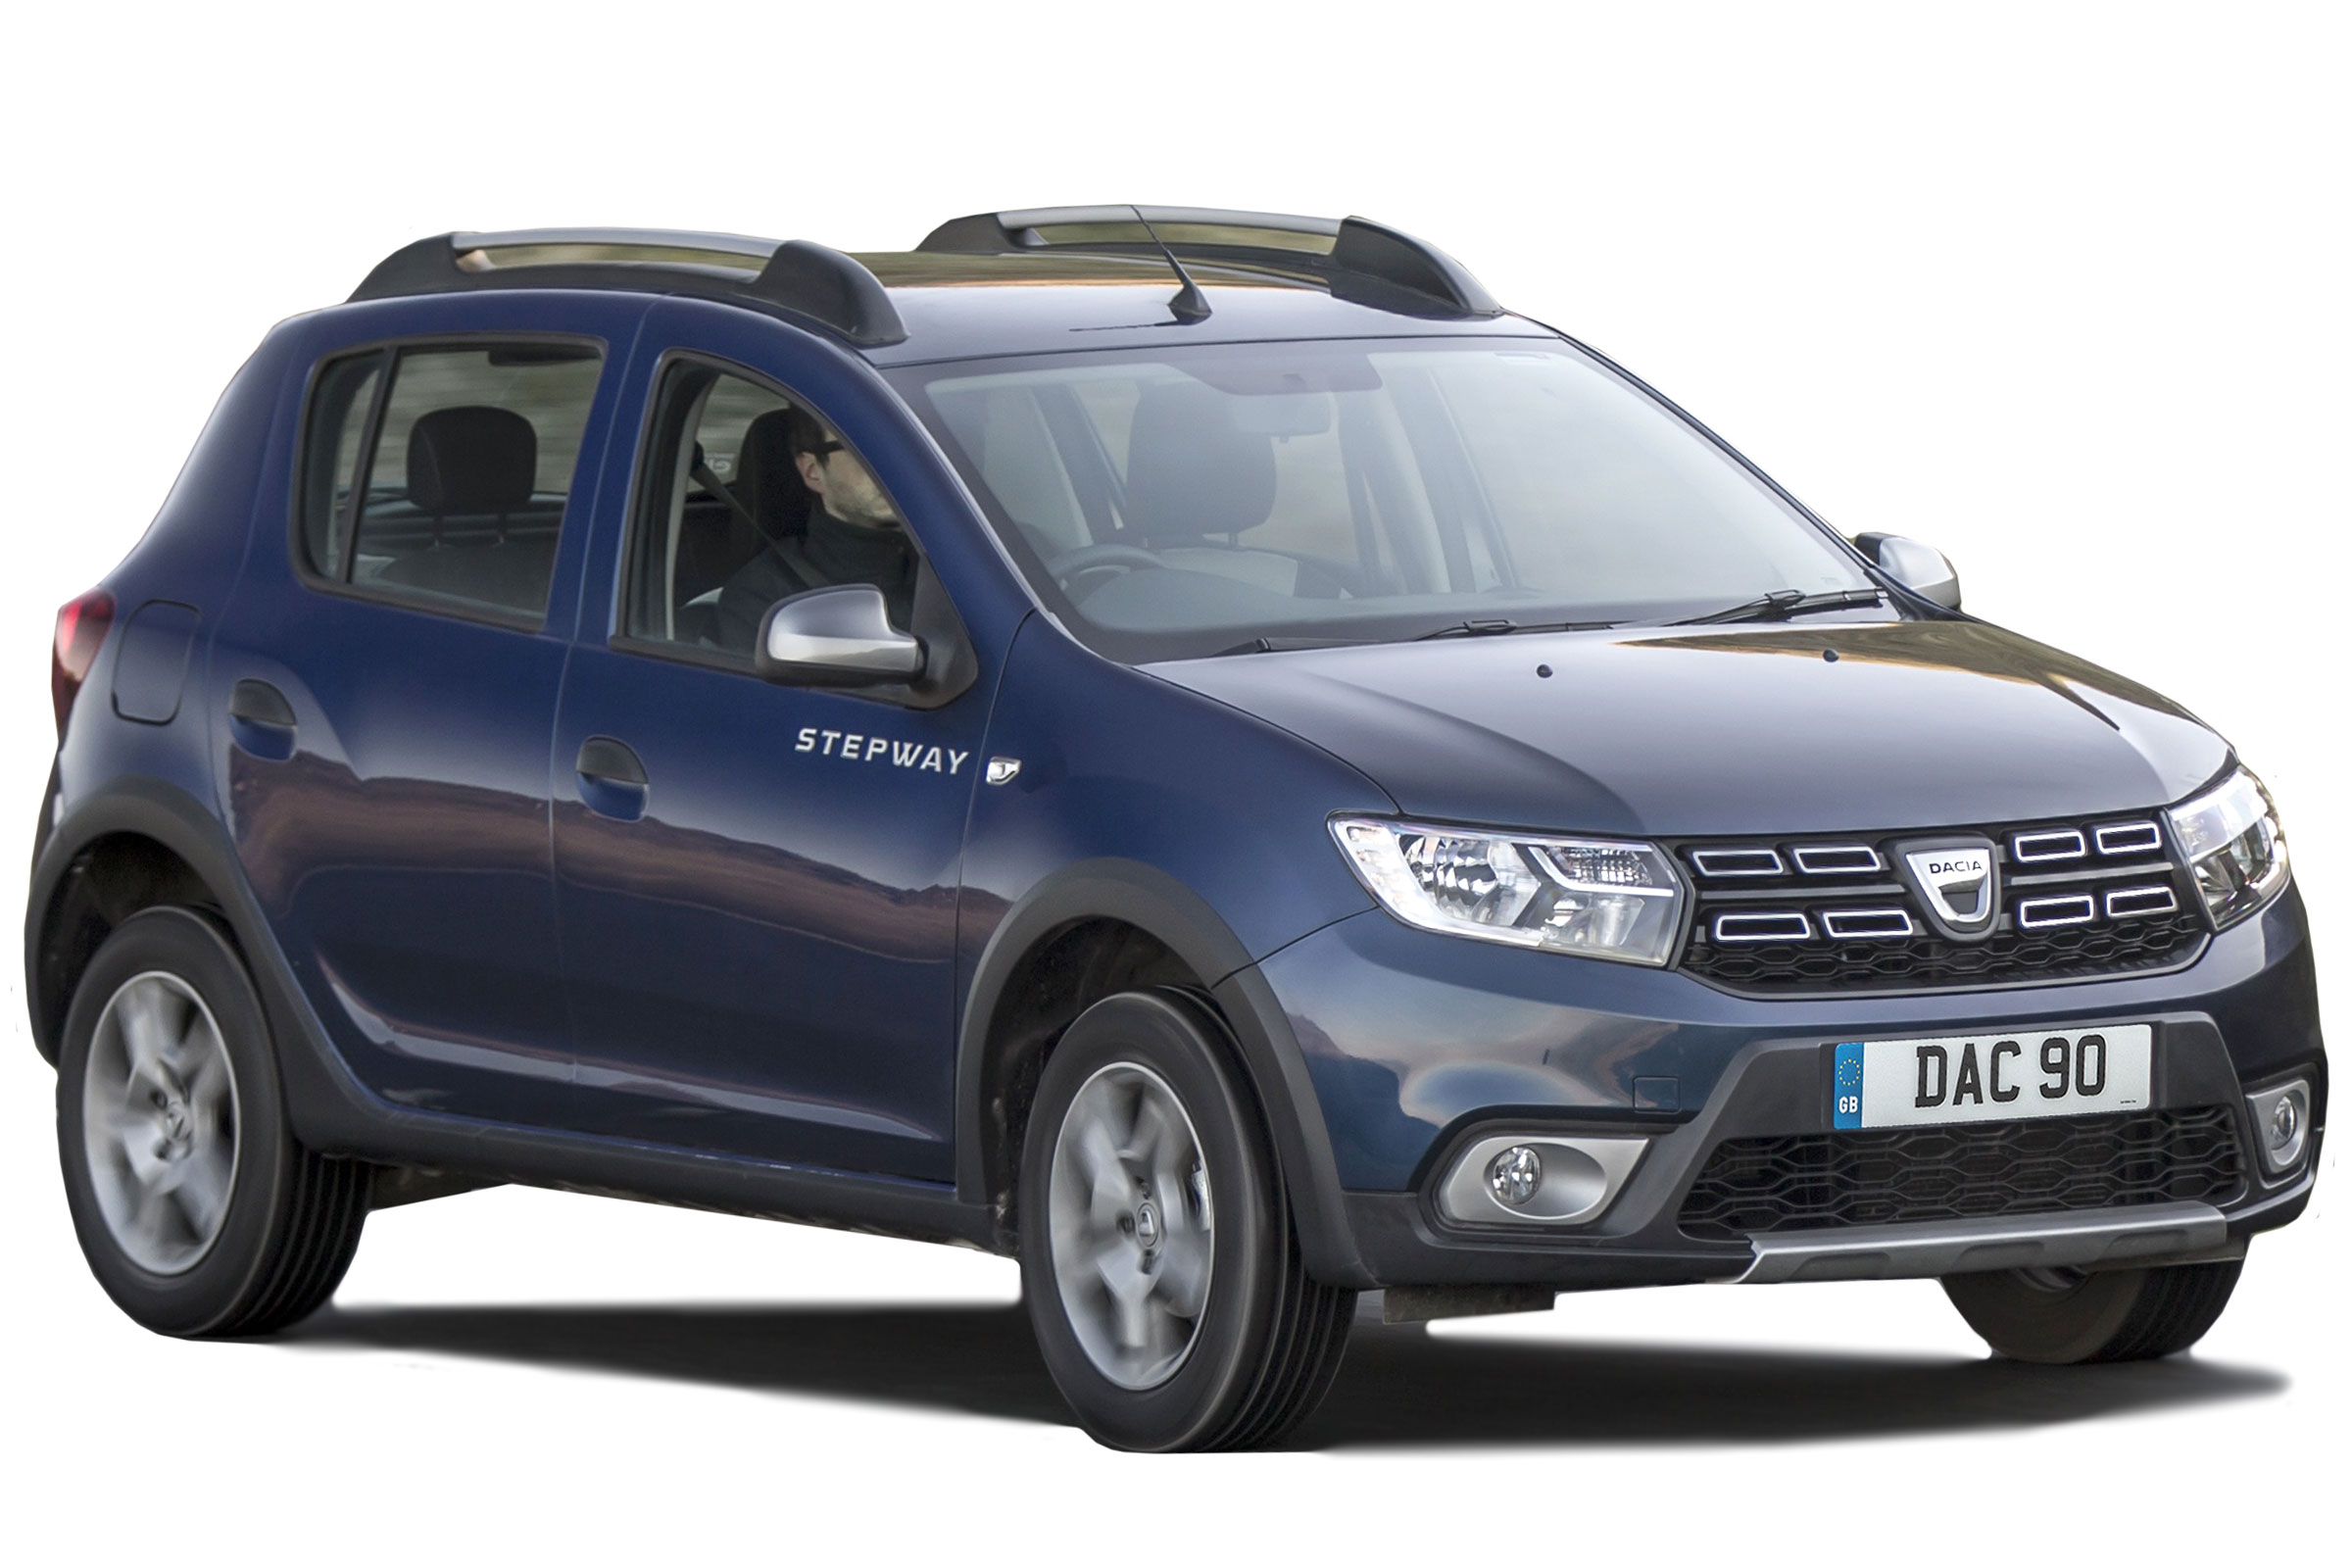 Dacia Sandero Stepway Hatchback Owner Reviews Mpg Problems Reliability Review Carbuyer